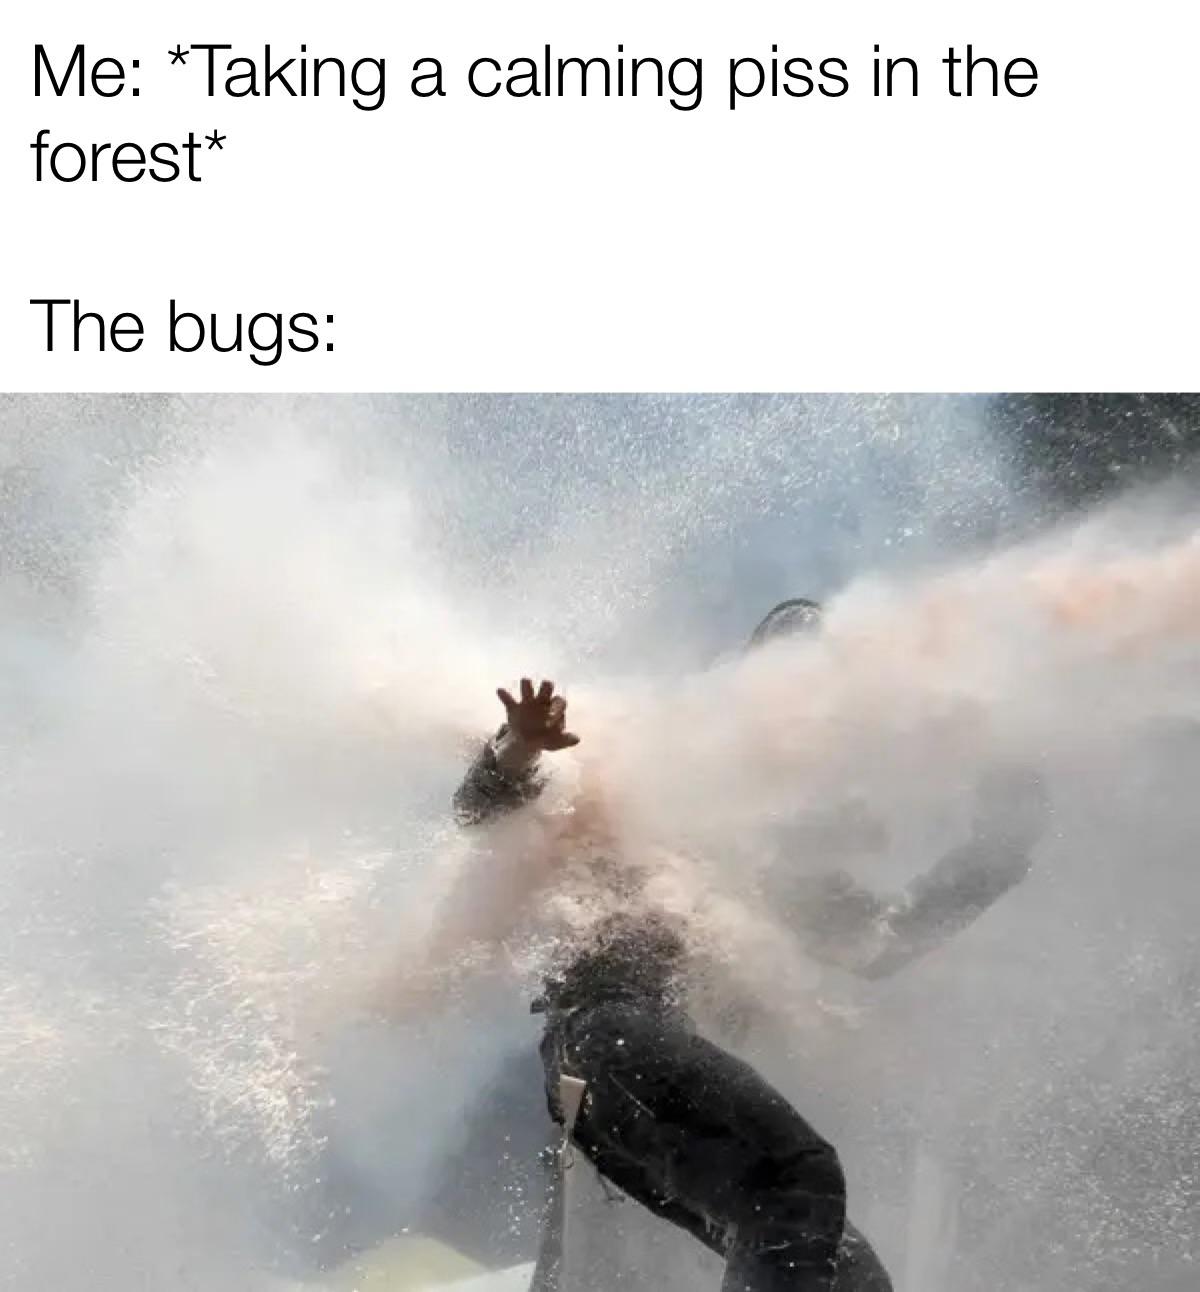 hilarious memes - Water cannon - Me Taking a calming piss in the forest The bugs